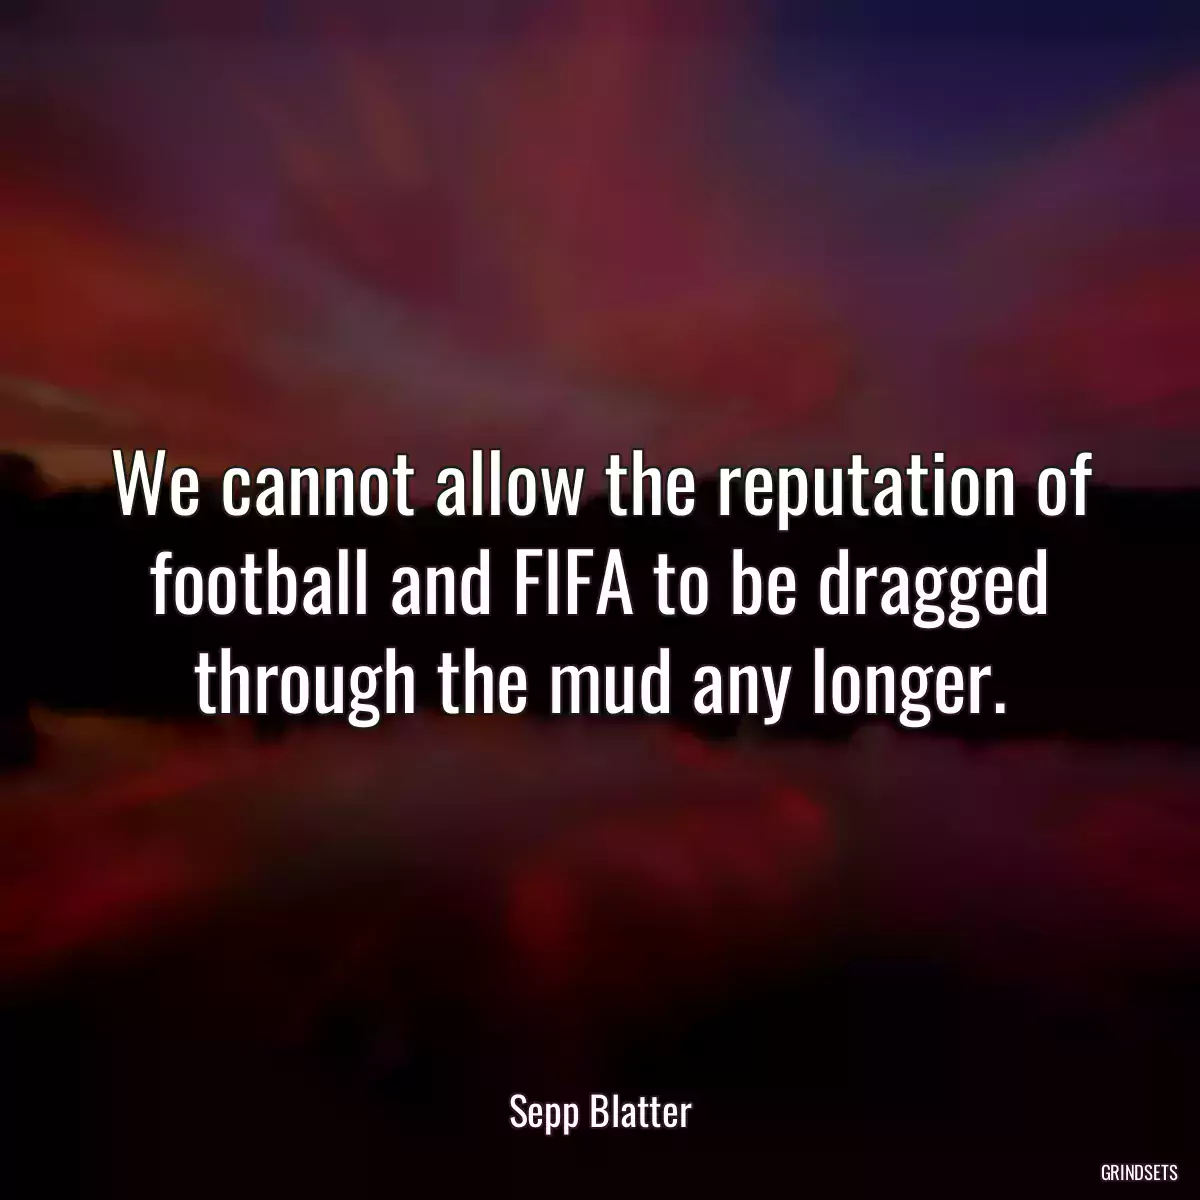 We cannot allow the reputation of football and FIFA to be dragged through the mud any longer.